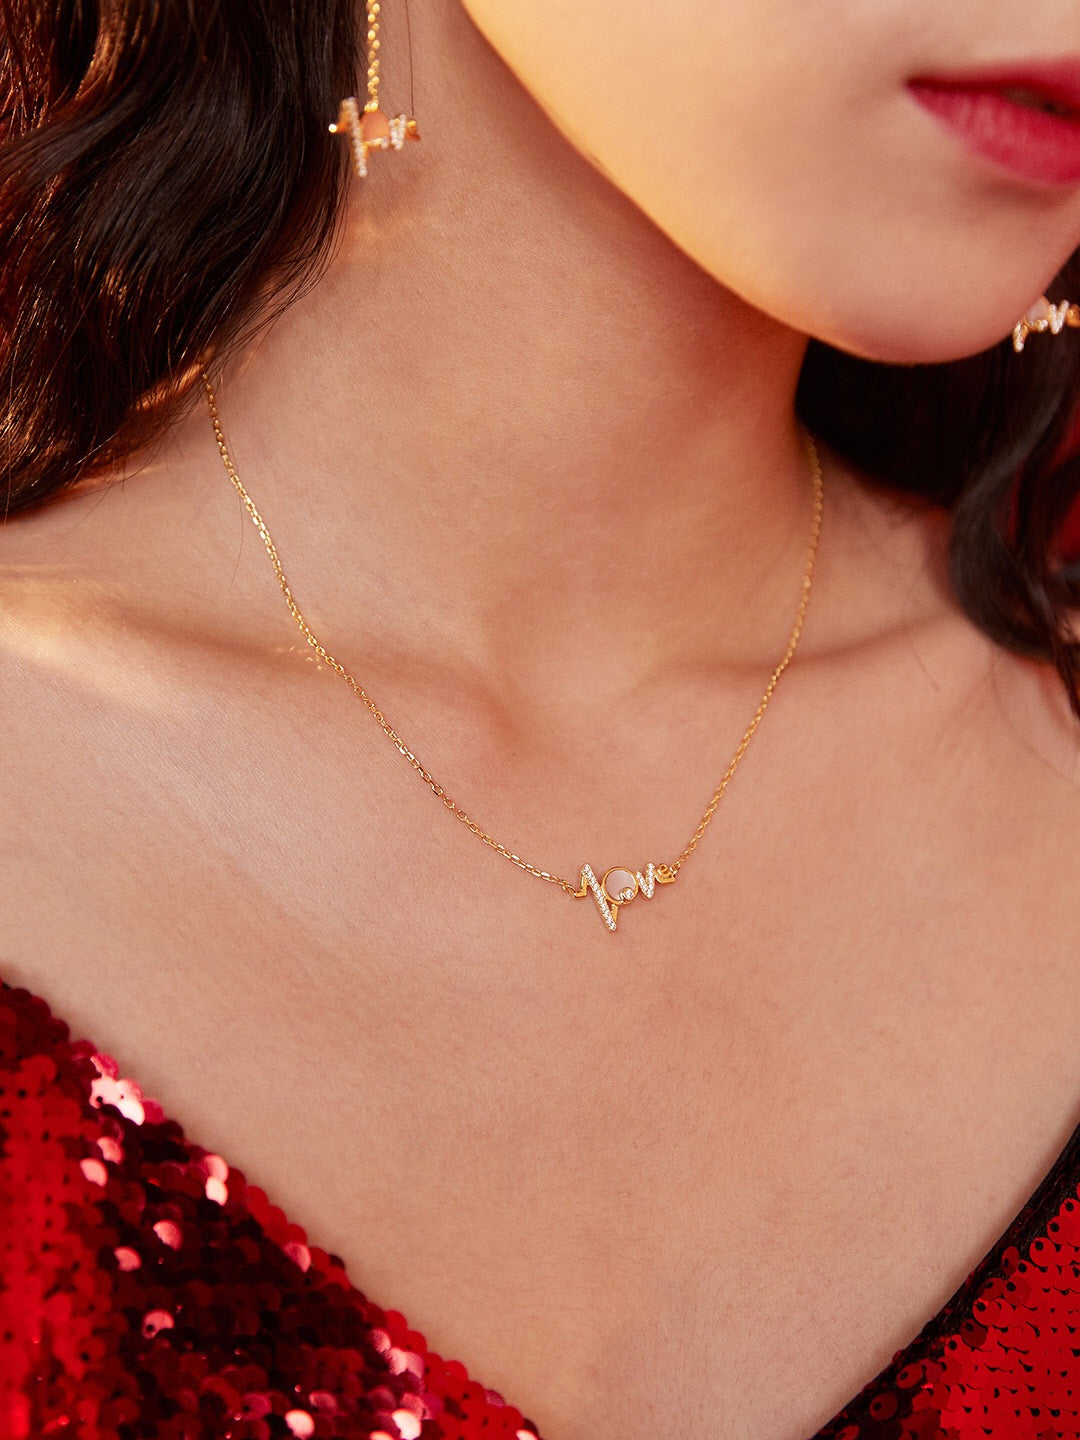 Love like a tide – “Love” Necklace and Earring Set